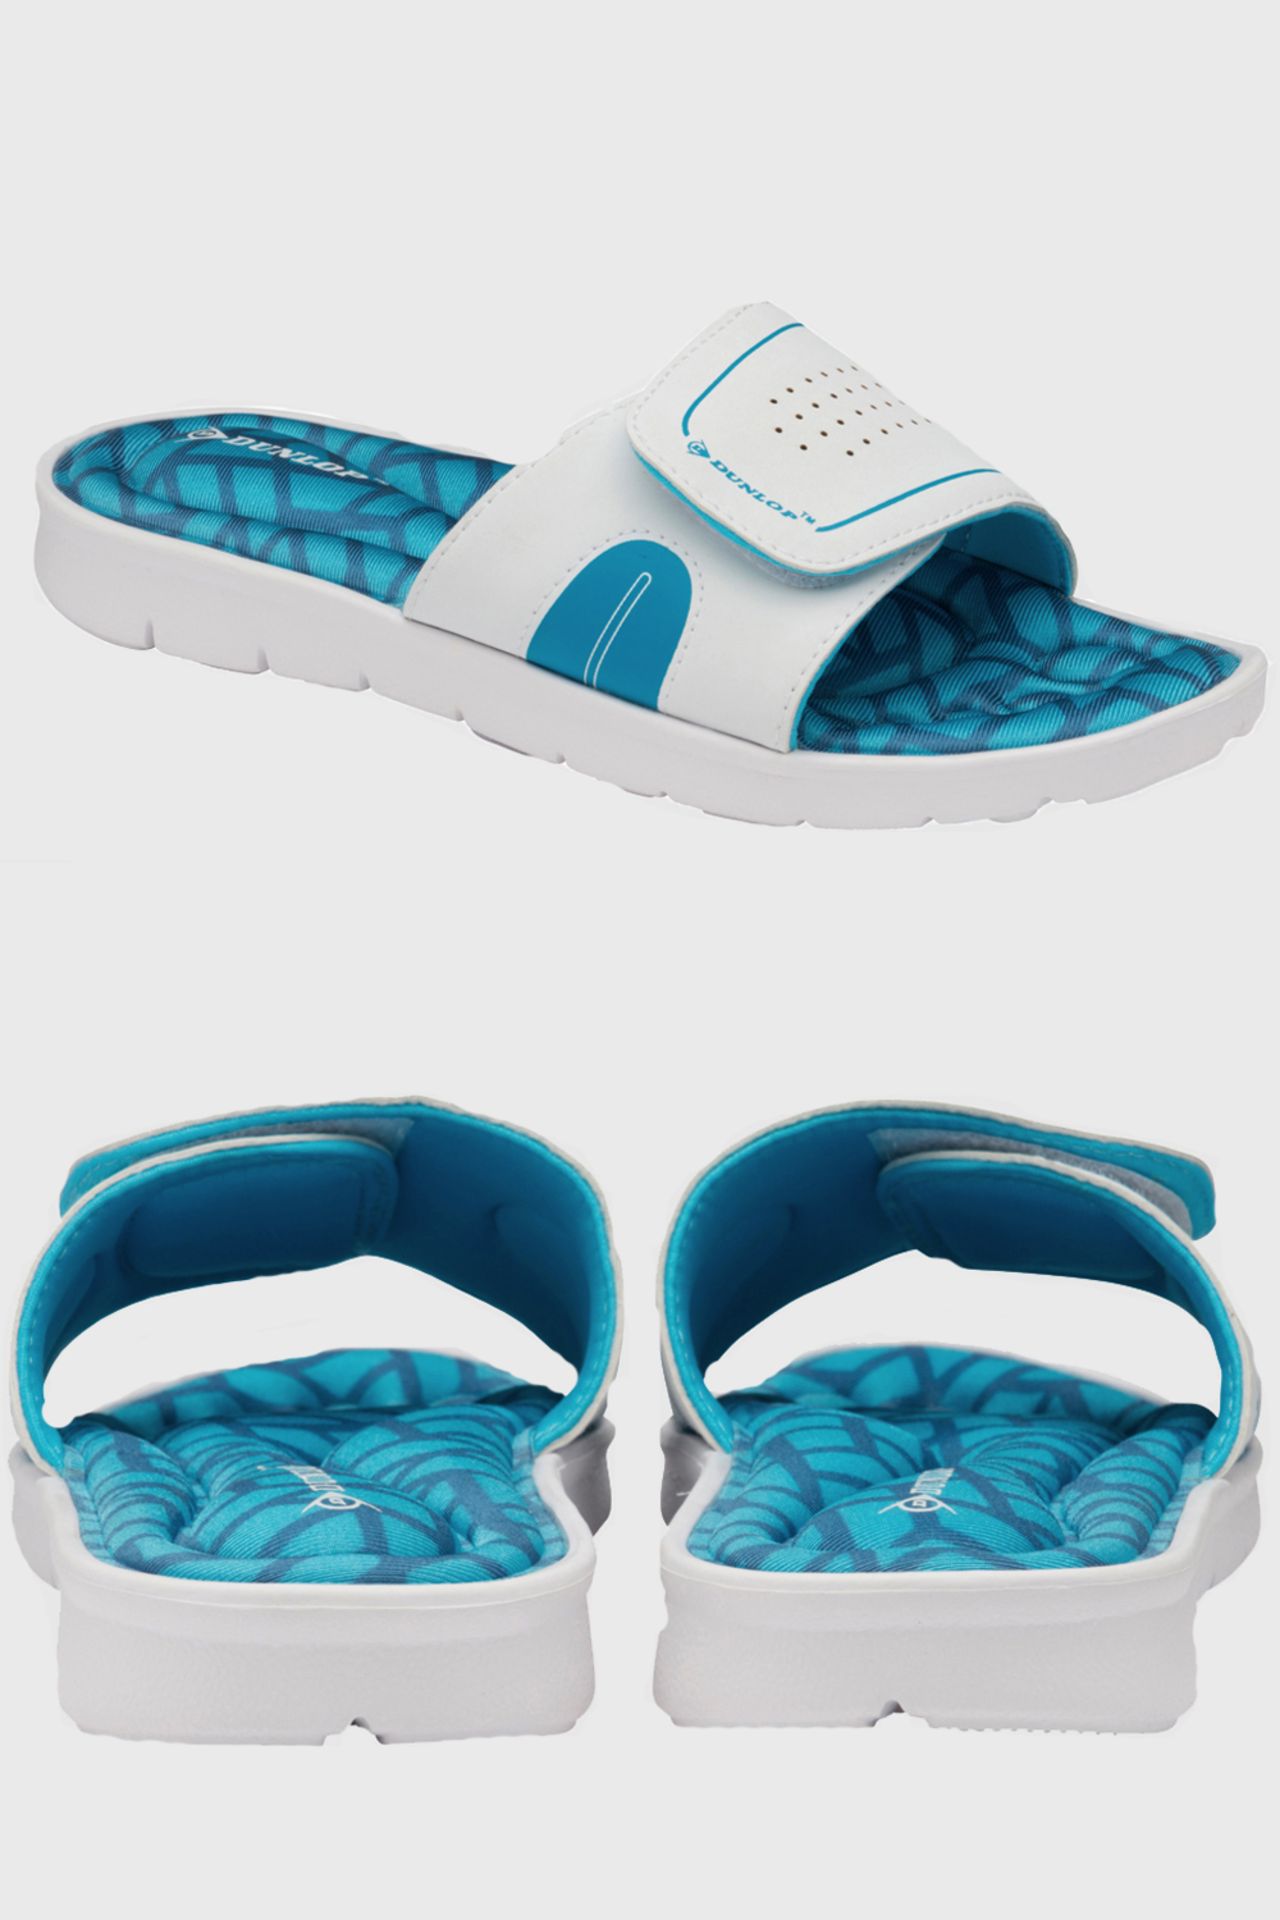 14 X BRAND NEW JAYNE DUNLOP ADJUSTABLE MEMORAY FOAM SLIDERS IN SIZES 3,4,5,6,7,8 COLOUR BLUE AND - Image 2 of 3